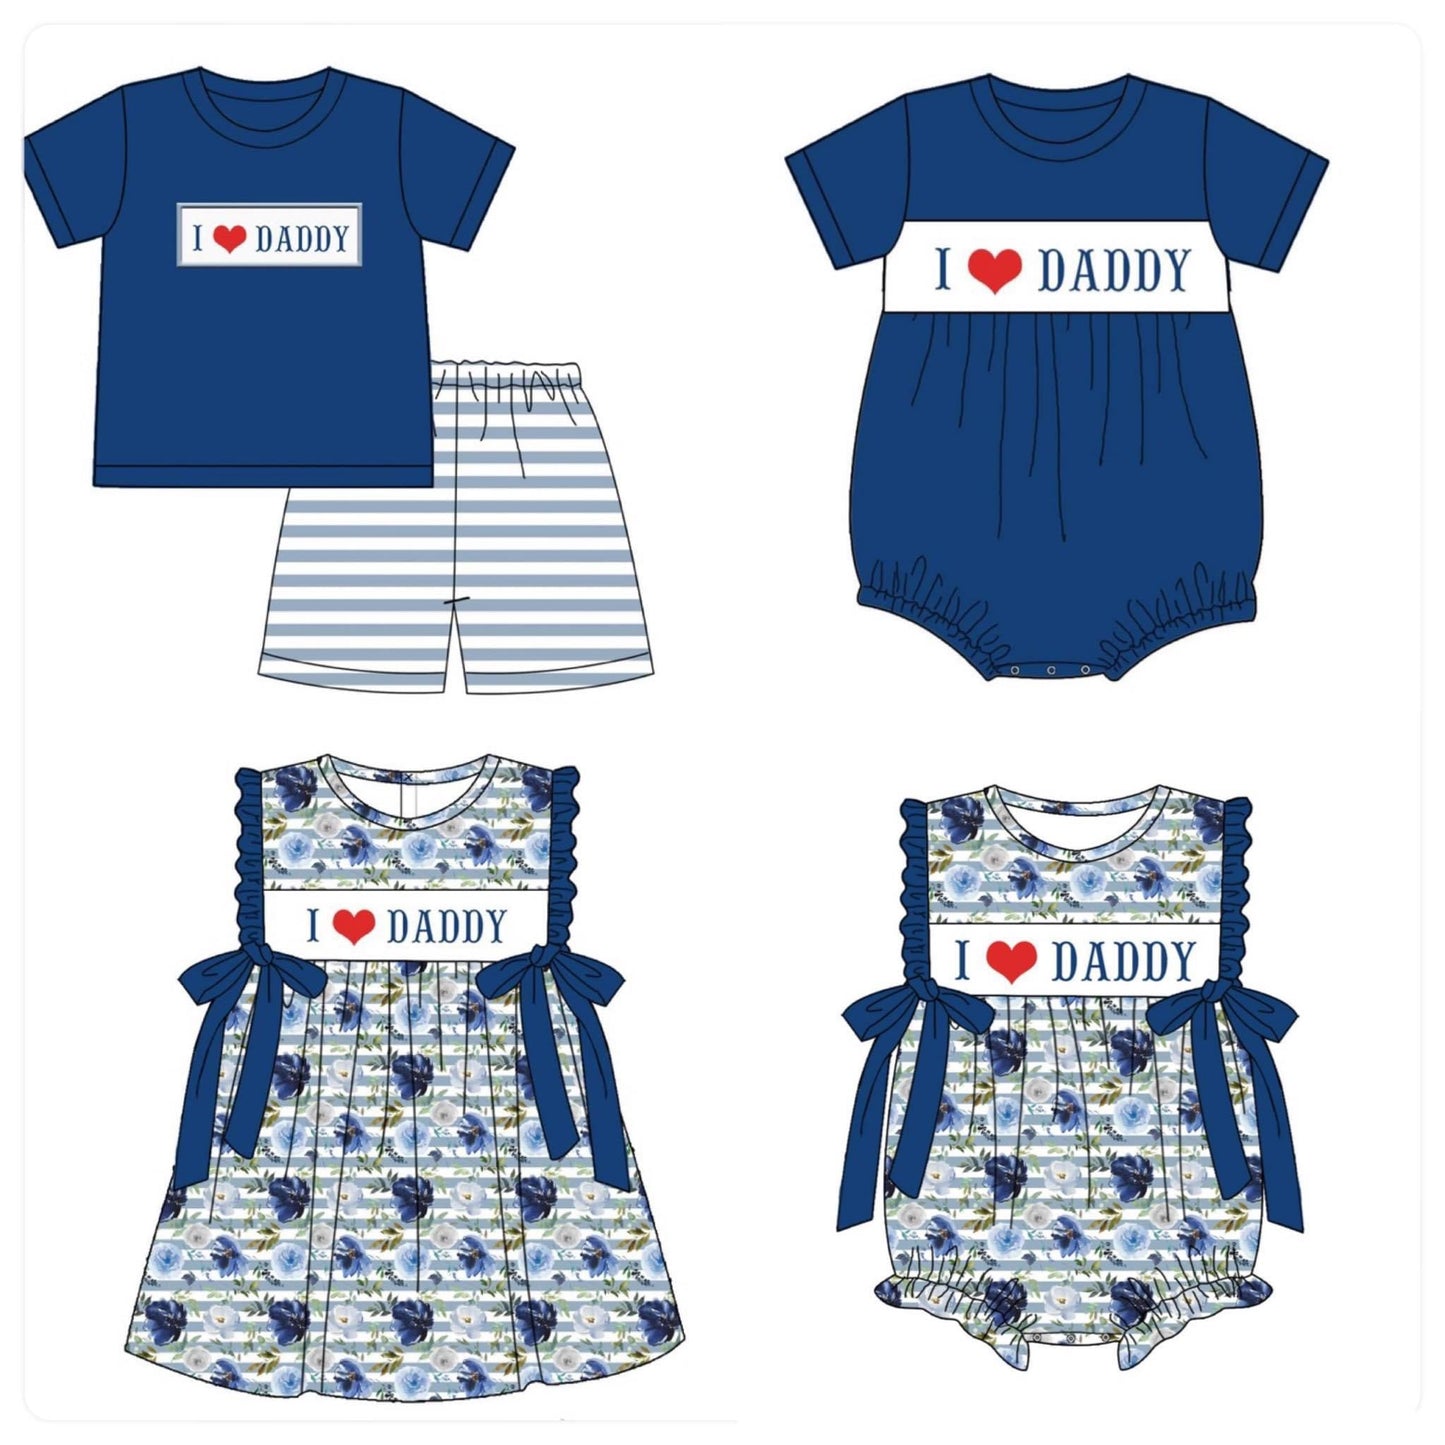 I ❤️ Daddy Appliqué Collection - ETA late May